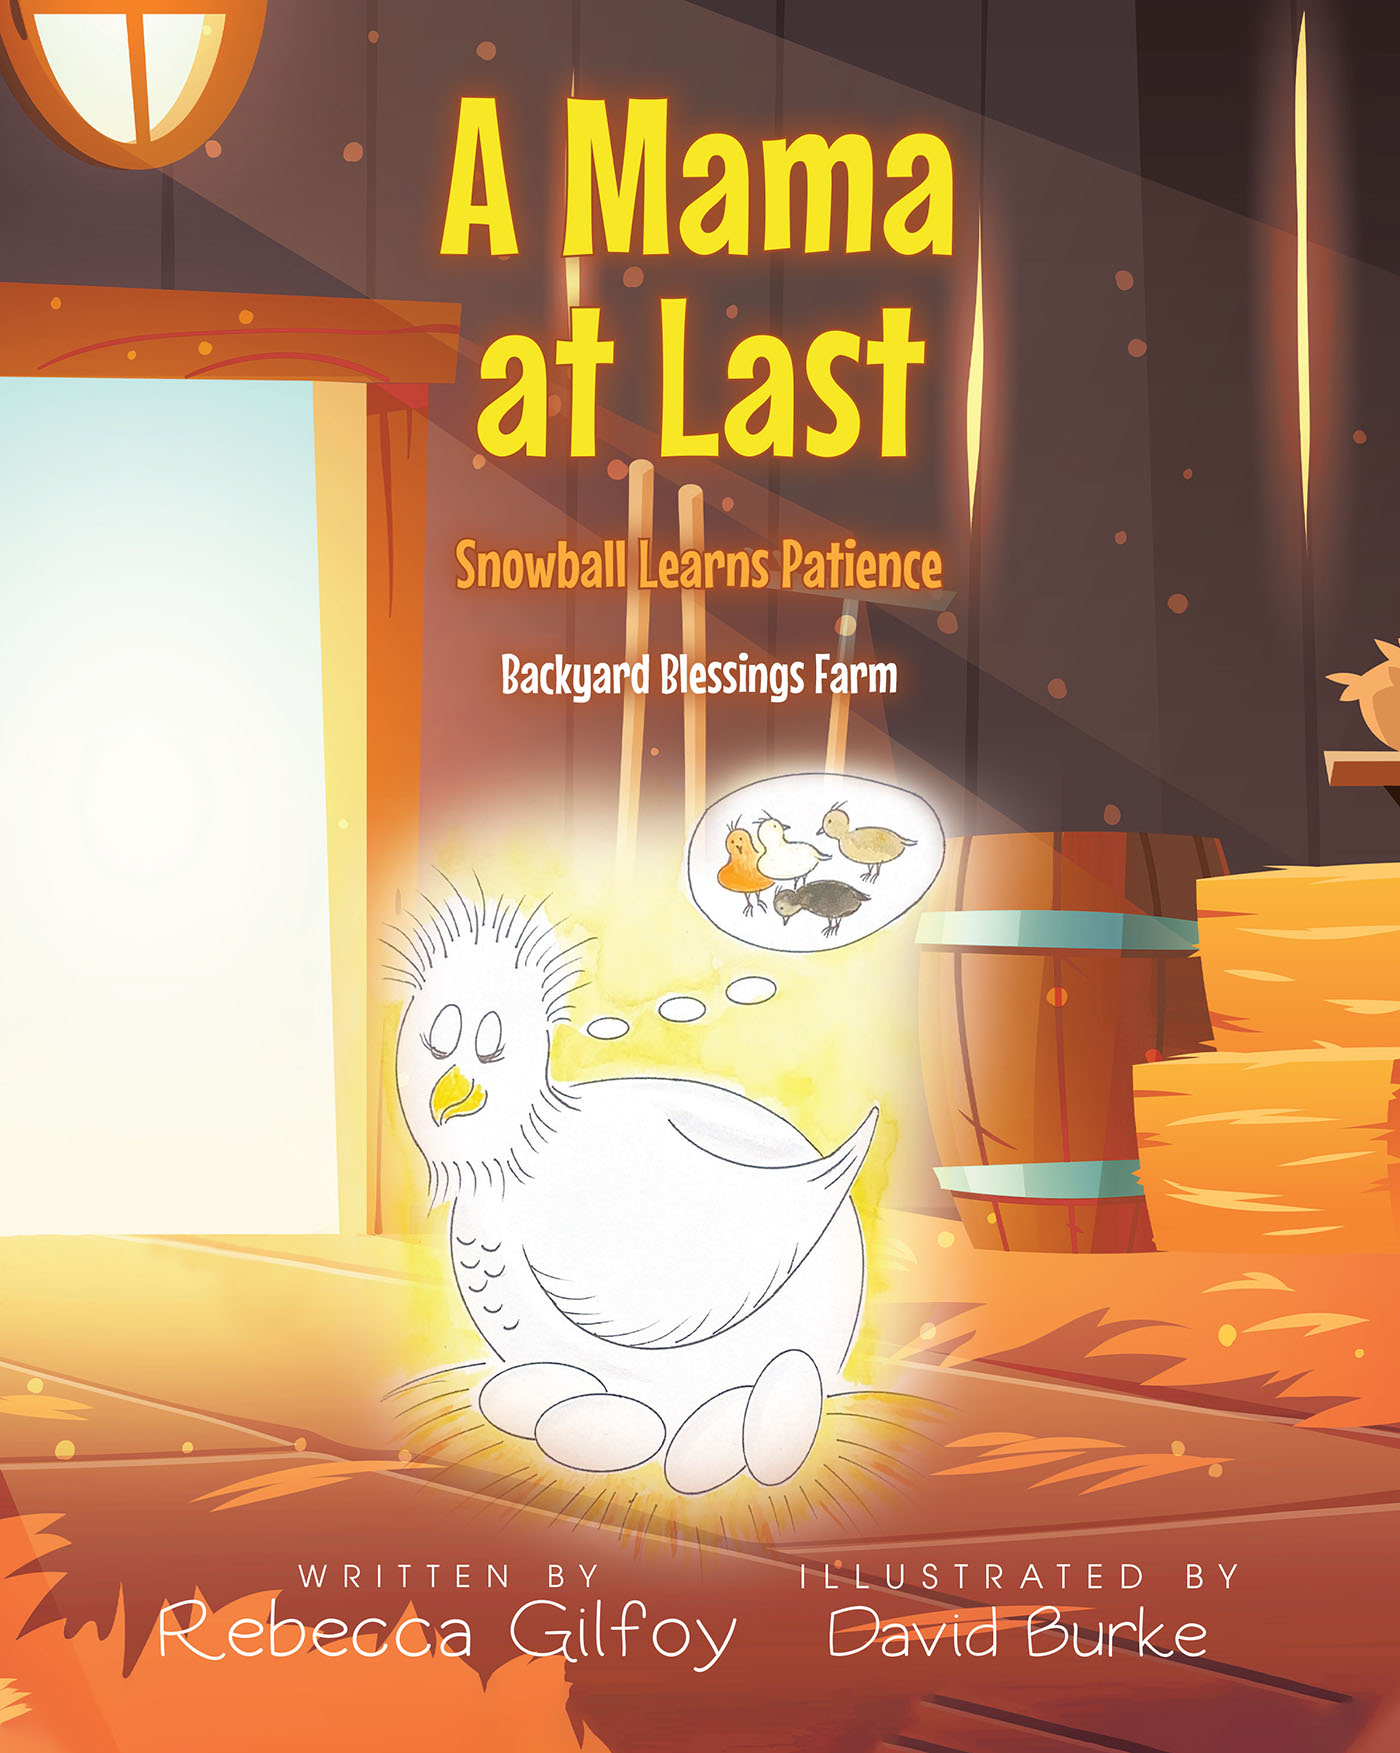 Rebecca Gilfoy’s Newly Released “A Mama at Last: Snowball Learns Patience” is a Sweet Story of a Hopeful Mother Hen Learning to be Patient